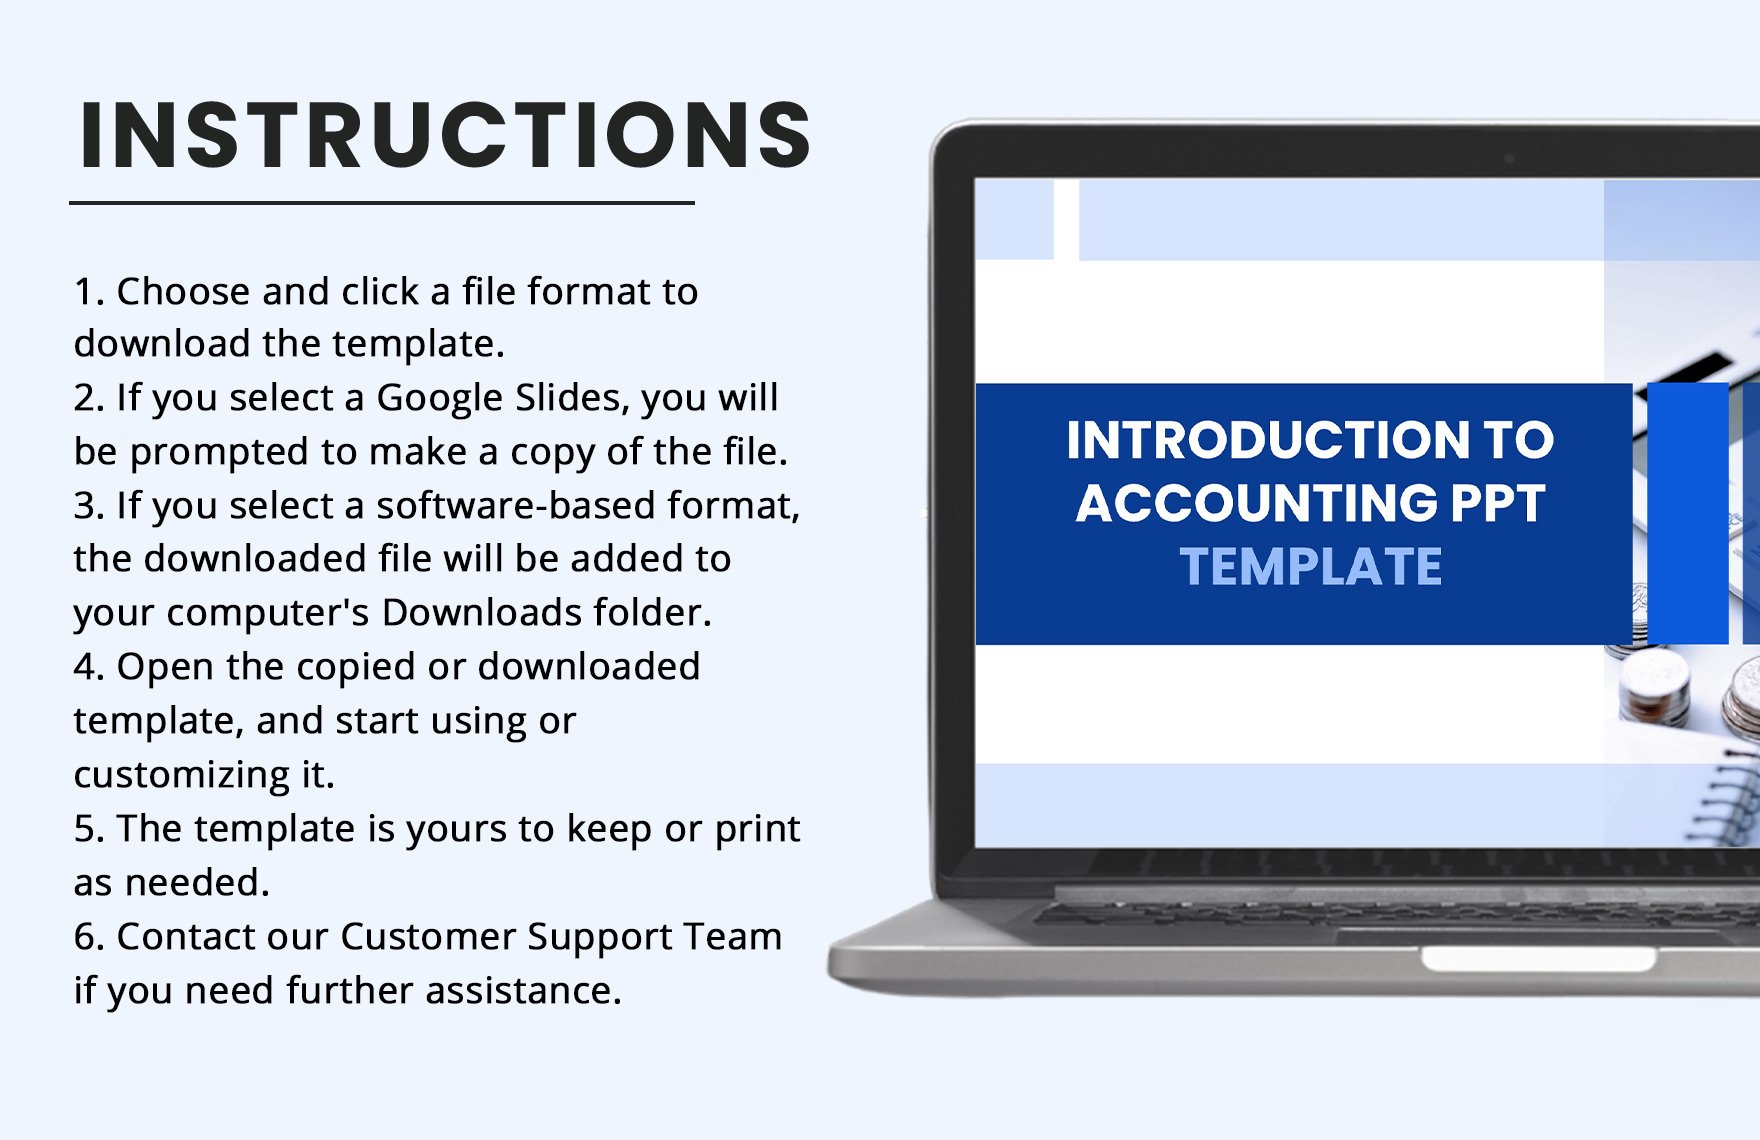 Introduction to Accounting PPT Template